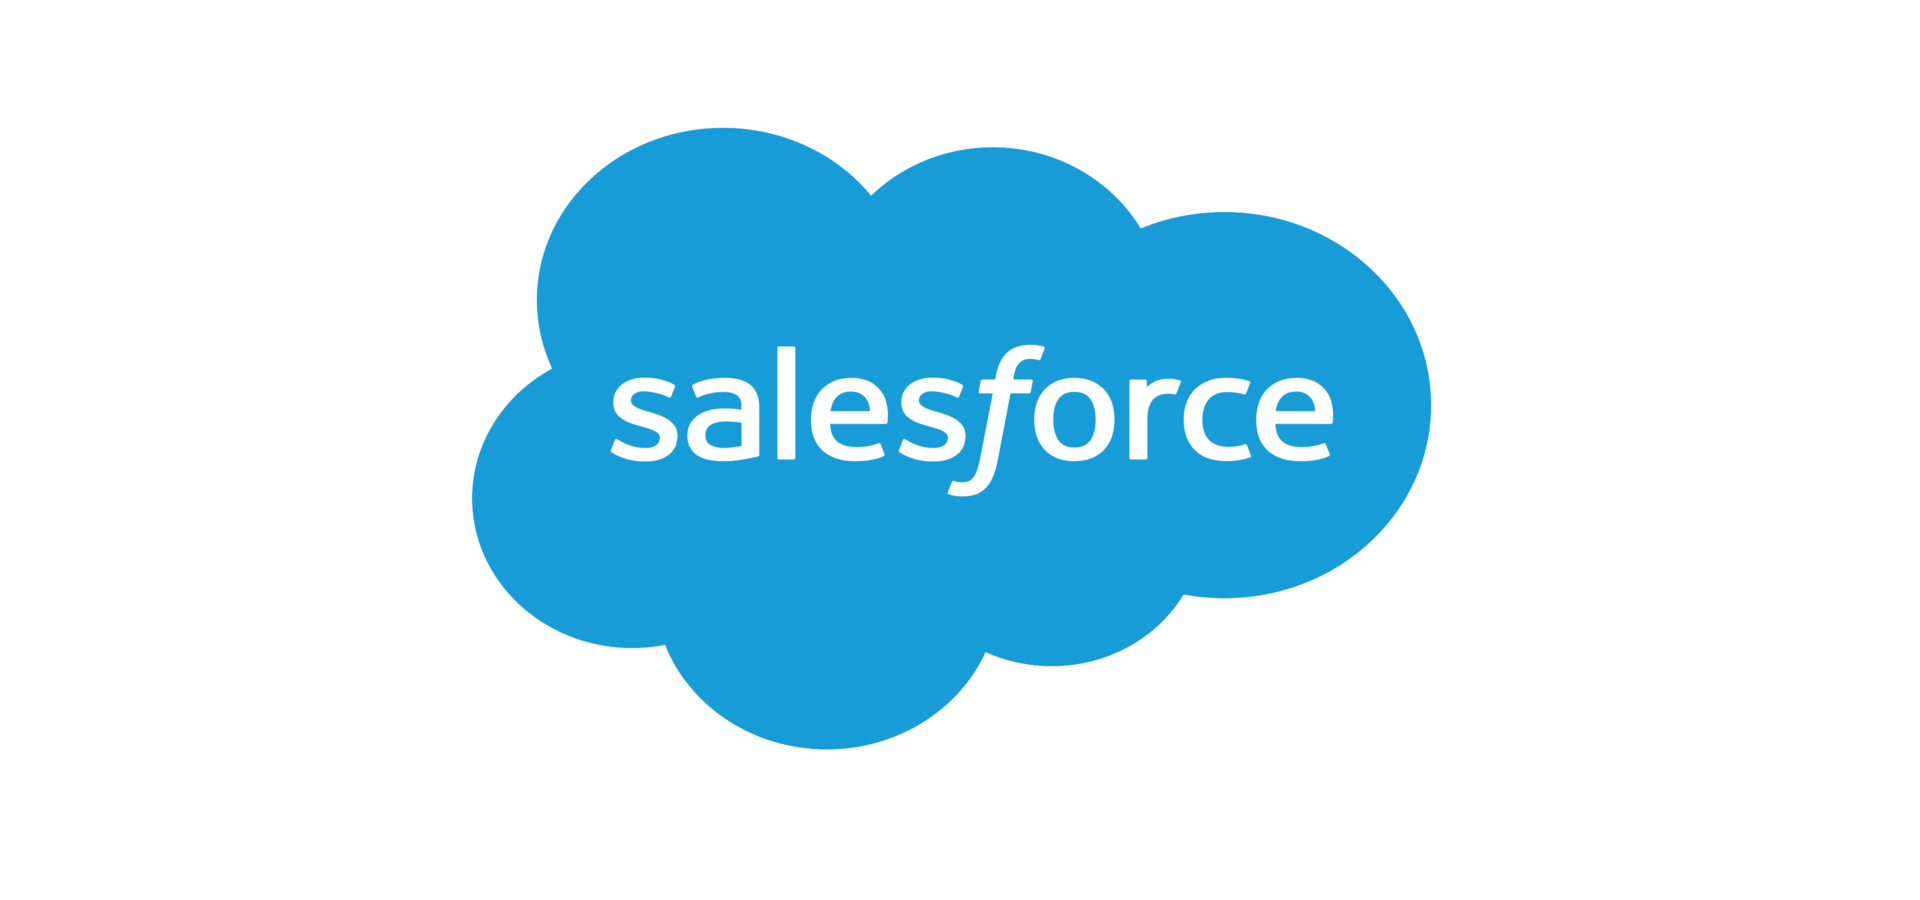 How to Choose the Right Salesforce License for Your Company in 2017